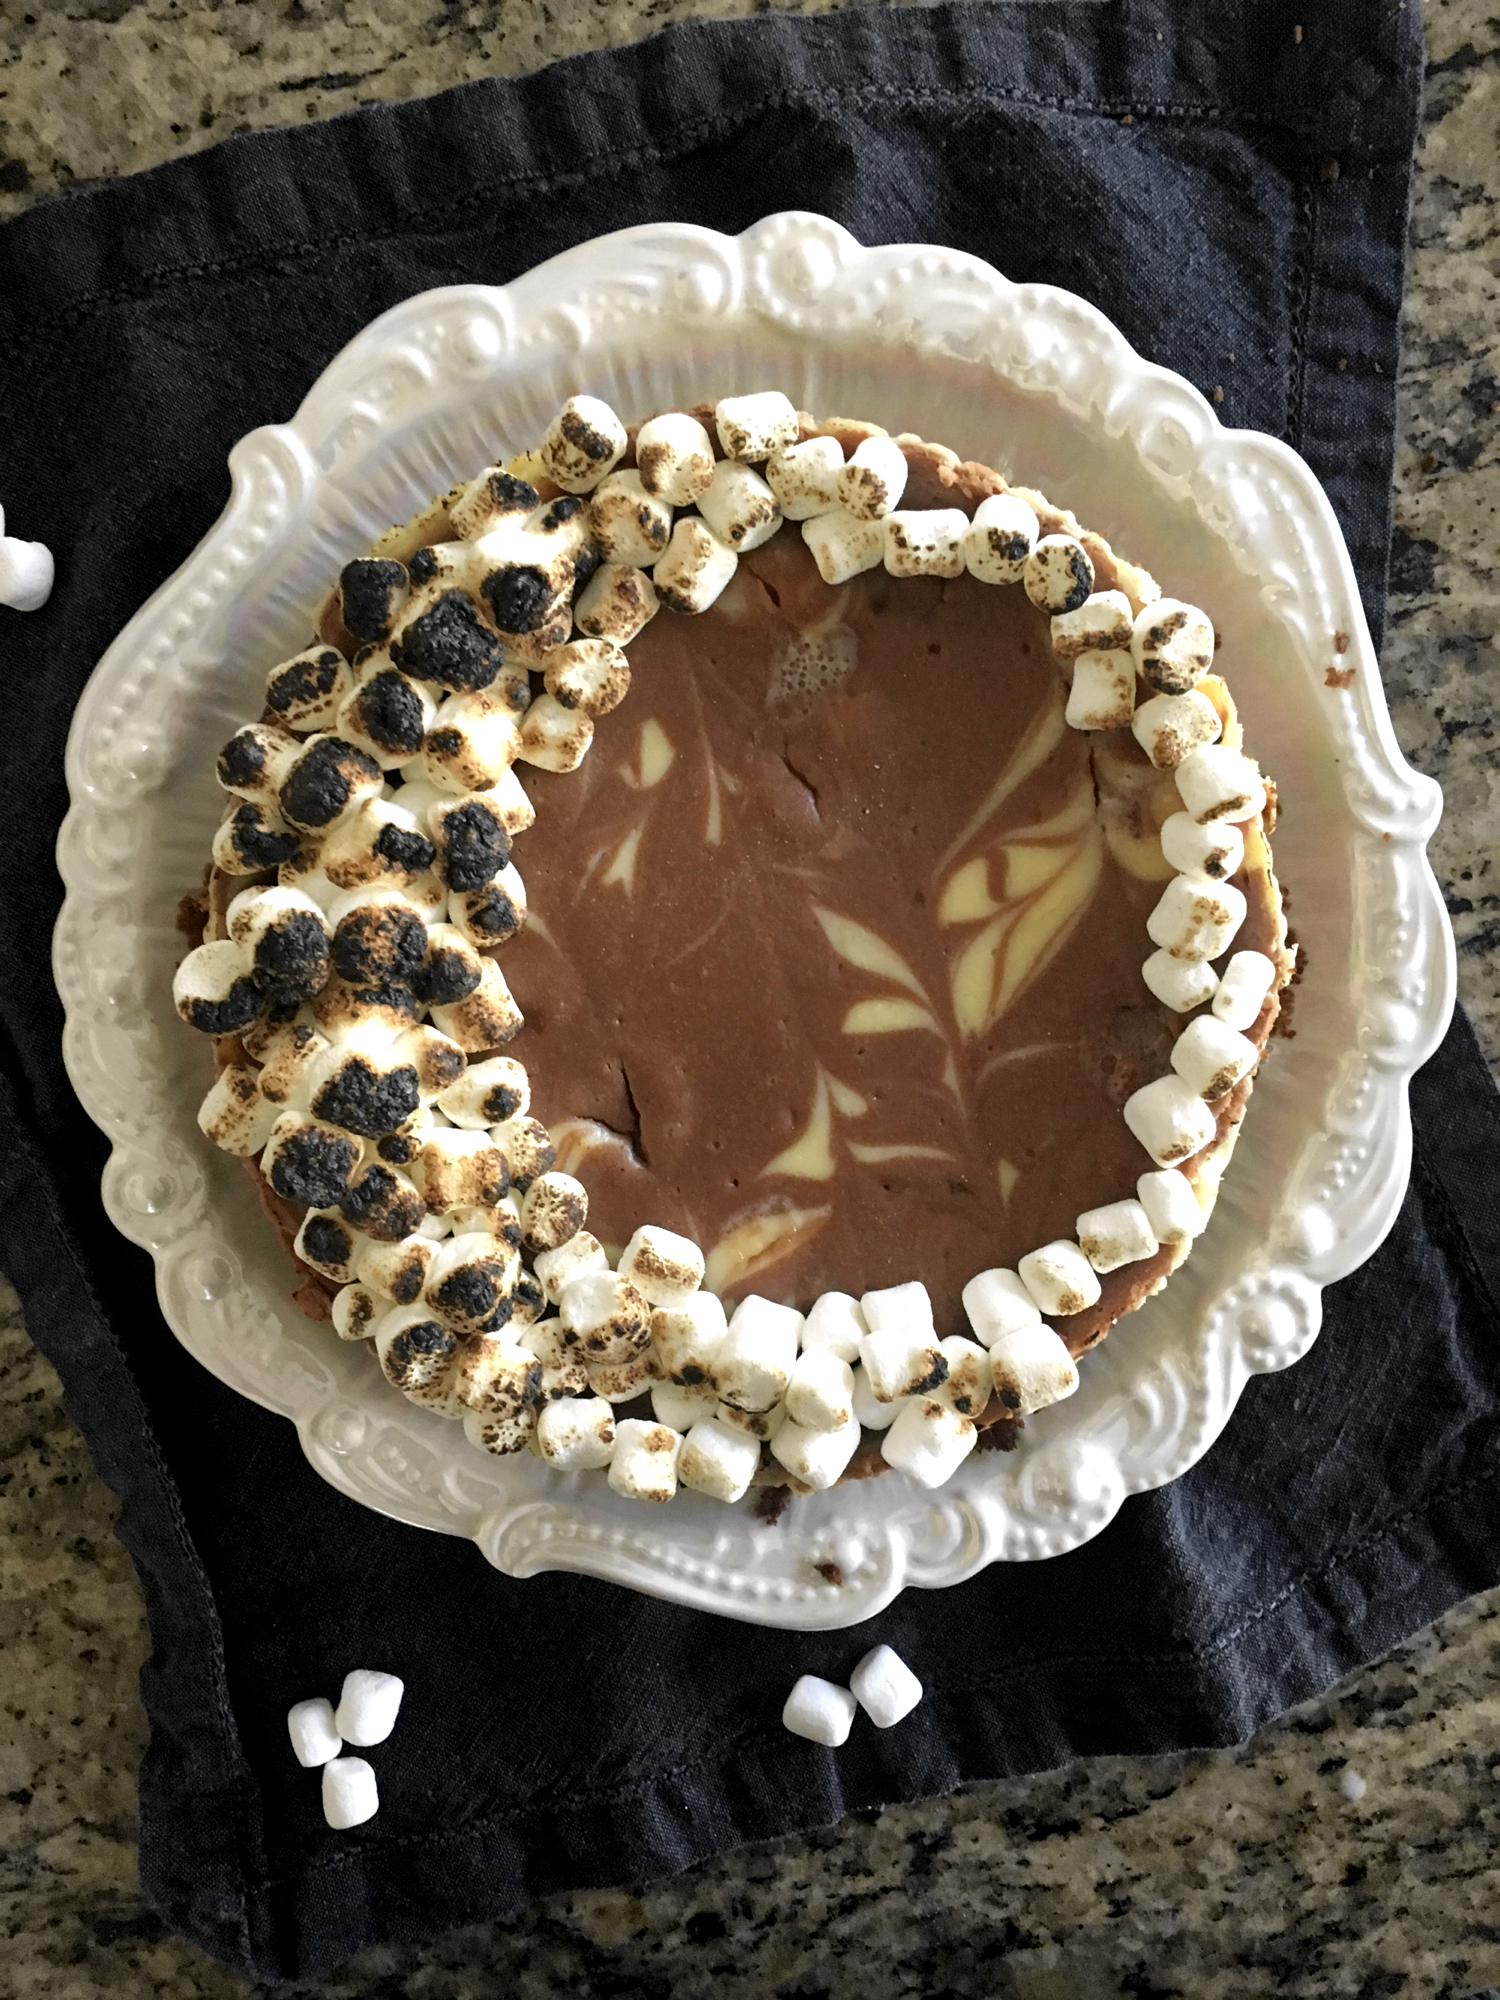 S'mores Cheesecake from ChefSarahElizabeth.com